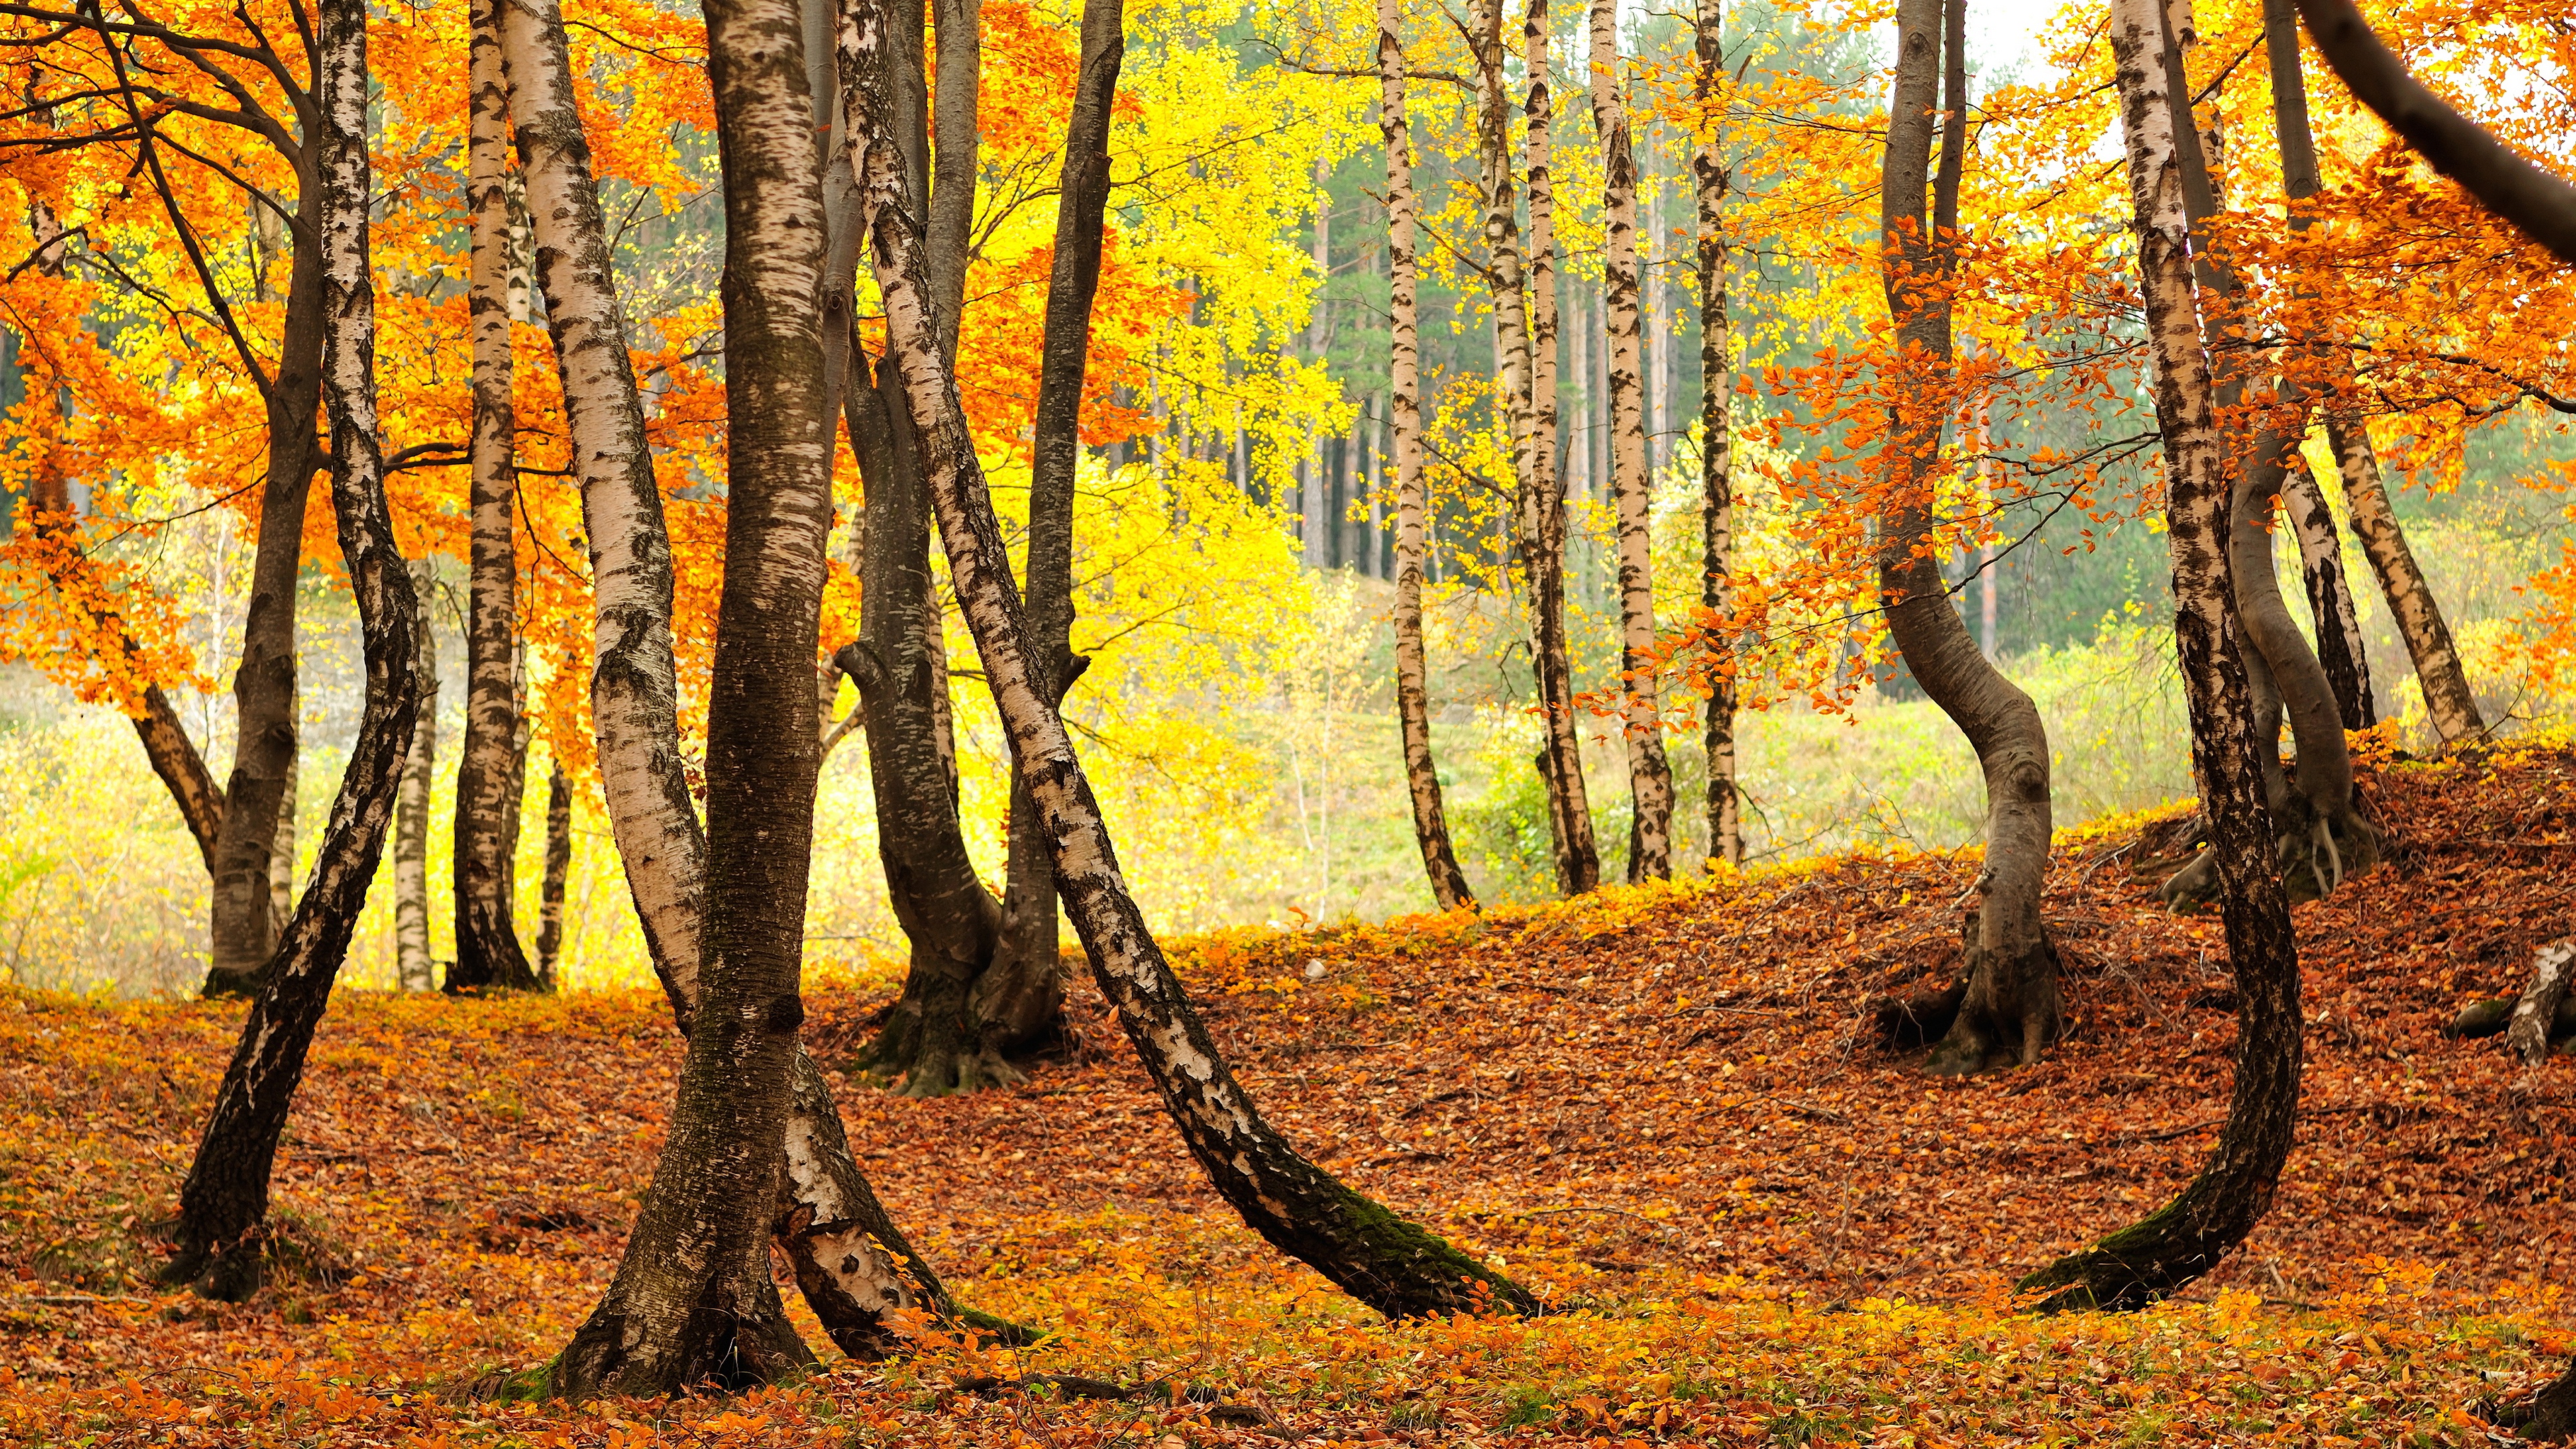 General 3840x2160 trees fall leaves nature yellow birch fallen leaves